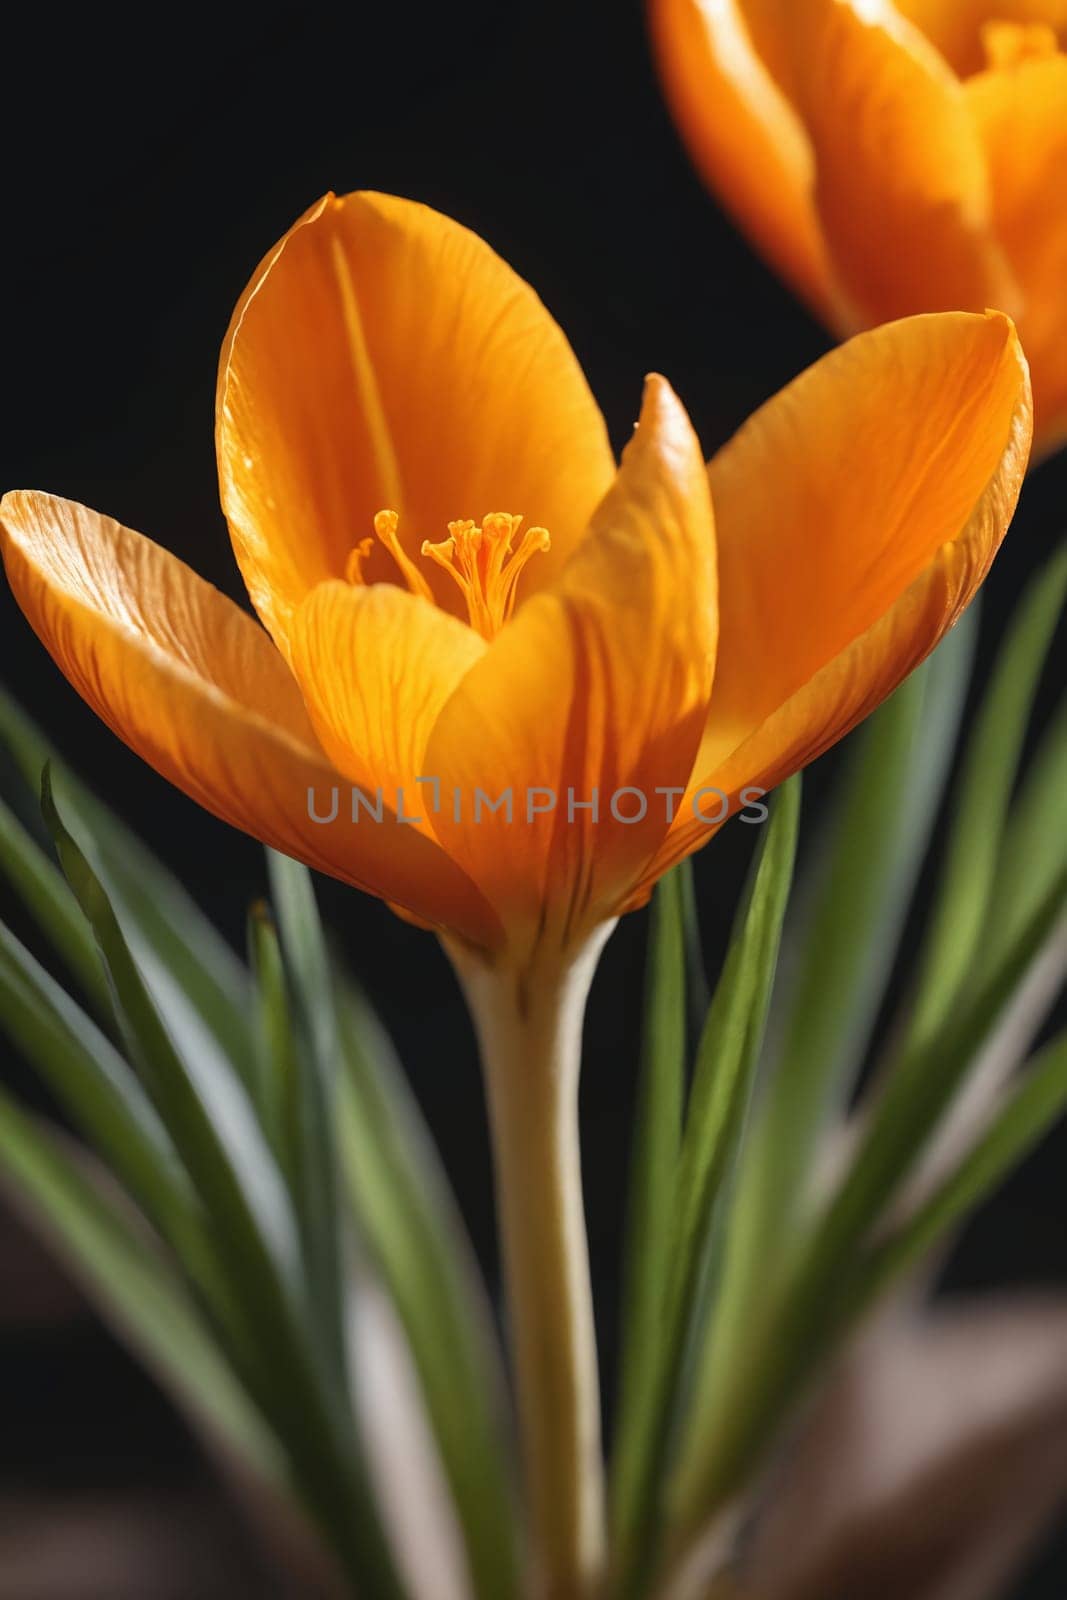 This striking image of a blooming crocus offers a touch of spring's warmth and is perfect for various uses from gardening blogs to greeting cards.